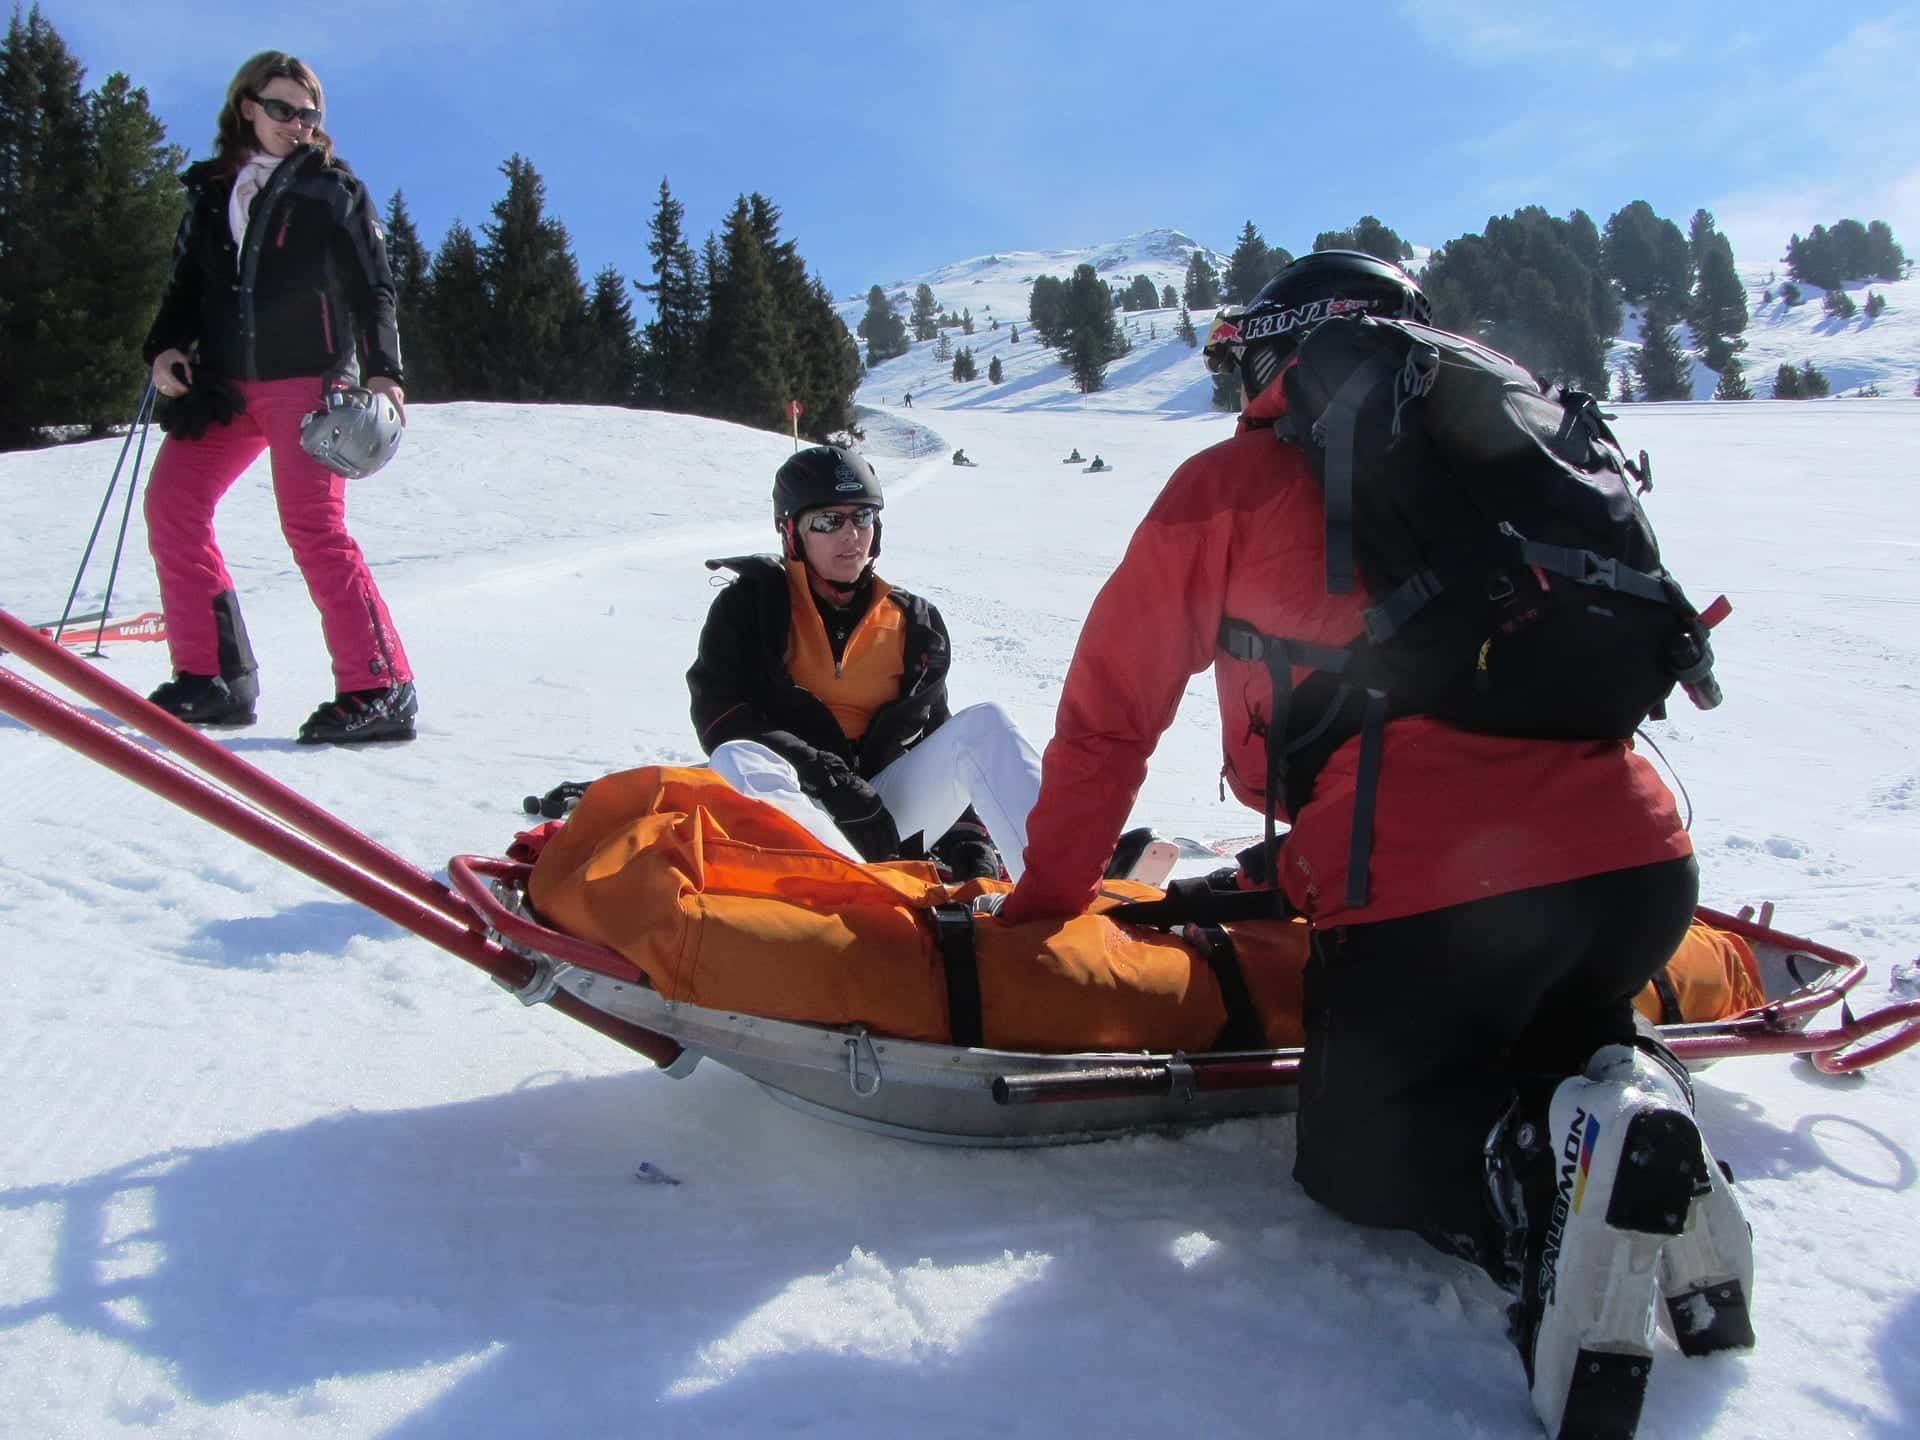 Skiing is a top cause of wintertime orthopedic injuries.